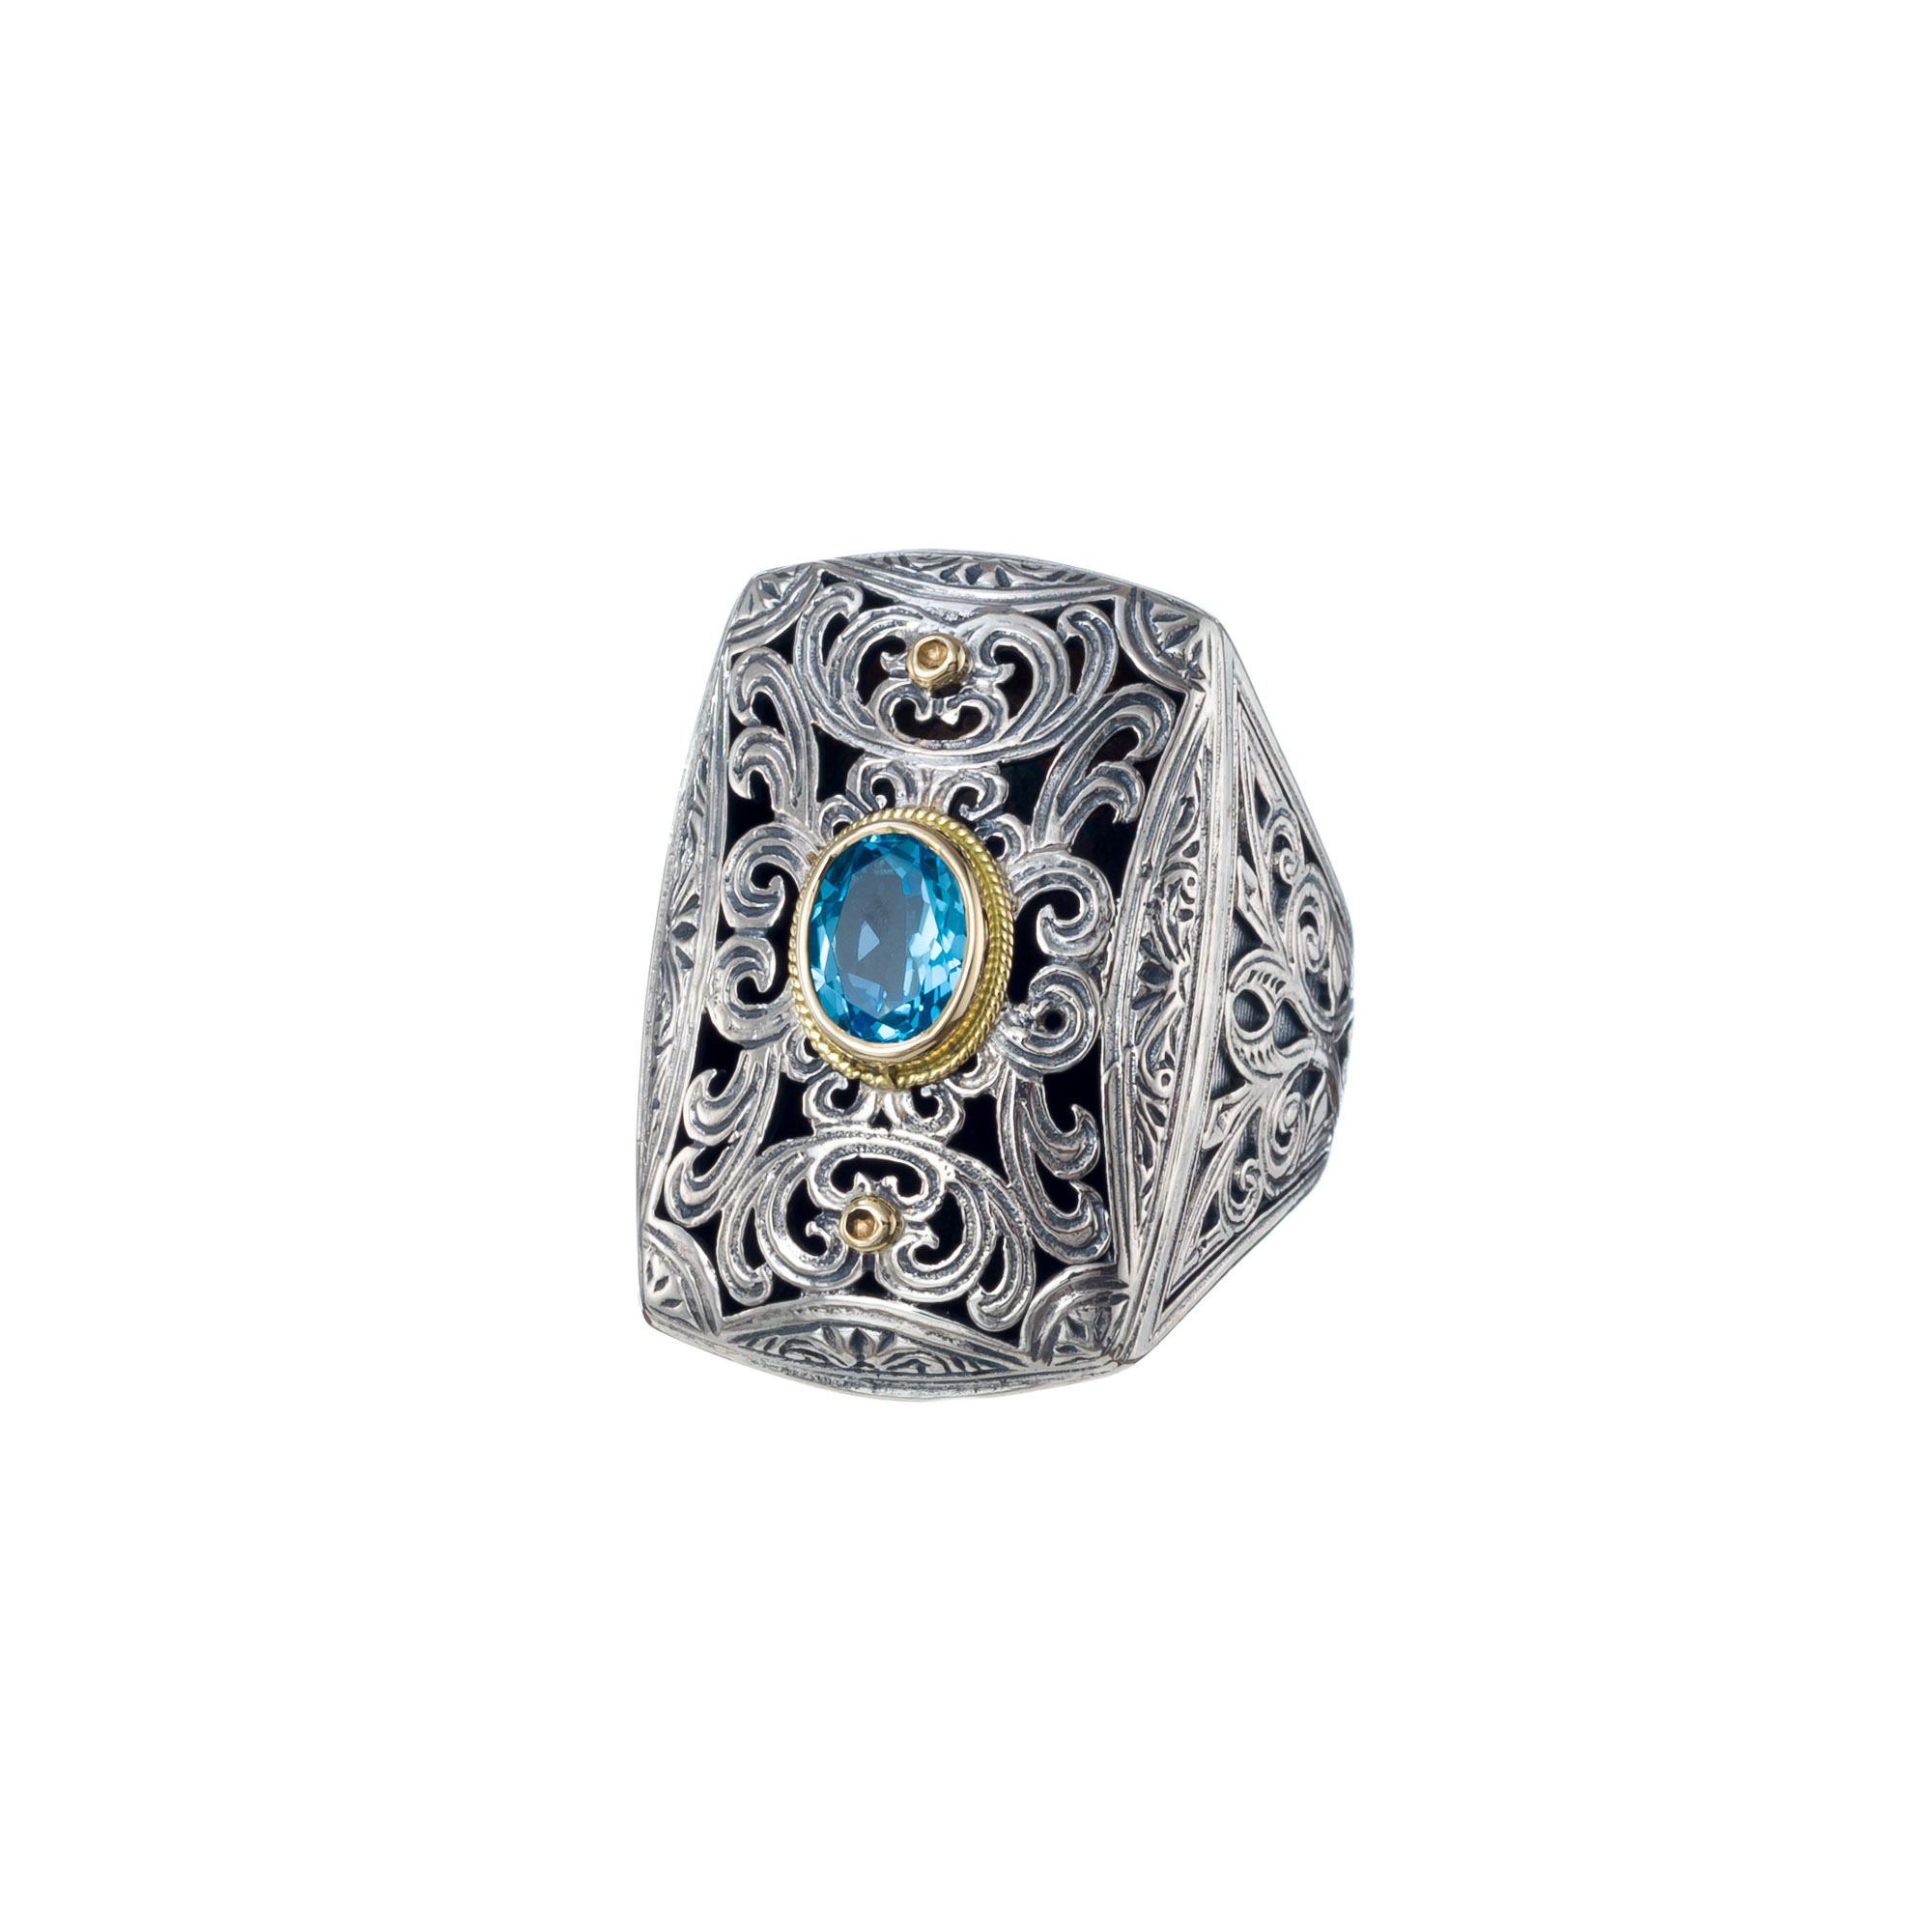 Garden shadows ring in 18K Gold and Sterling Silver with blue topaz